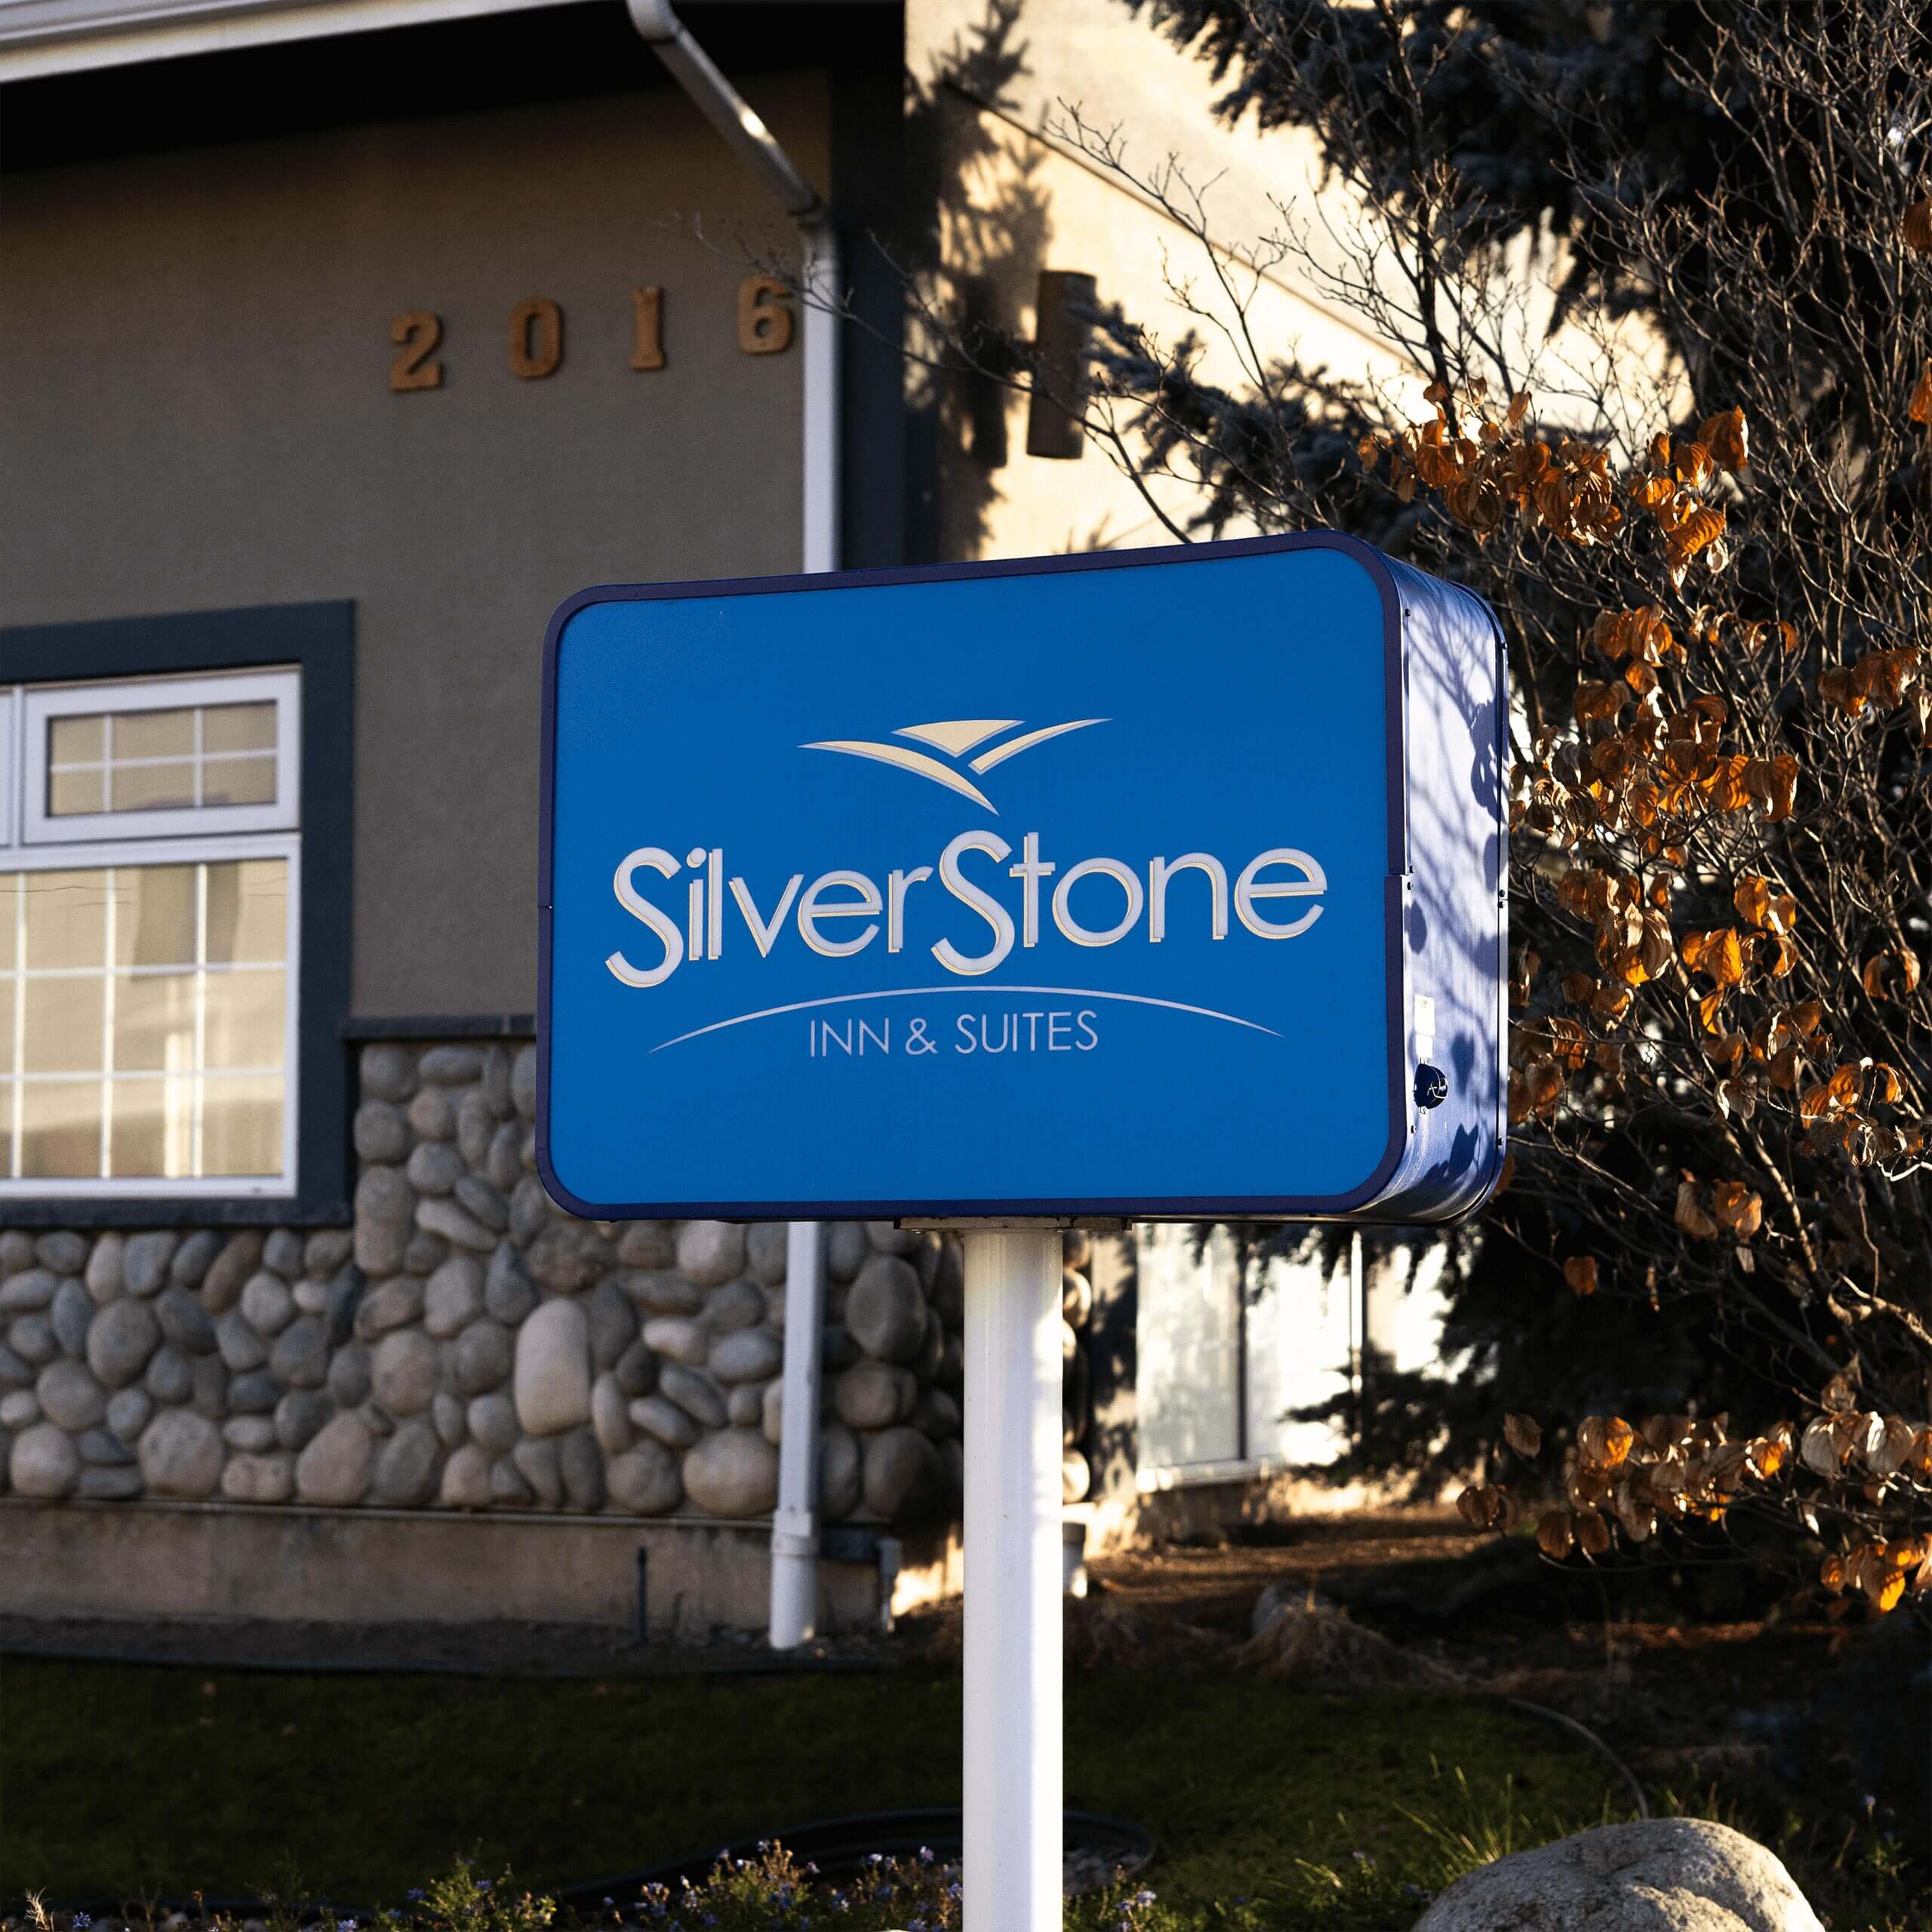 The signage of a SilverStone Inn Hotel.